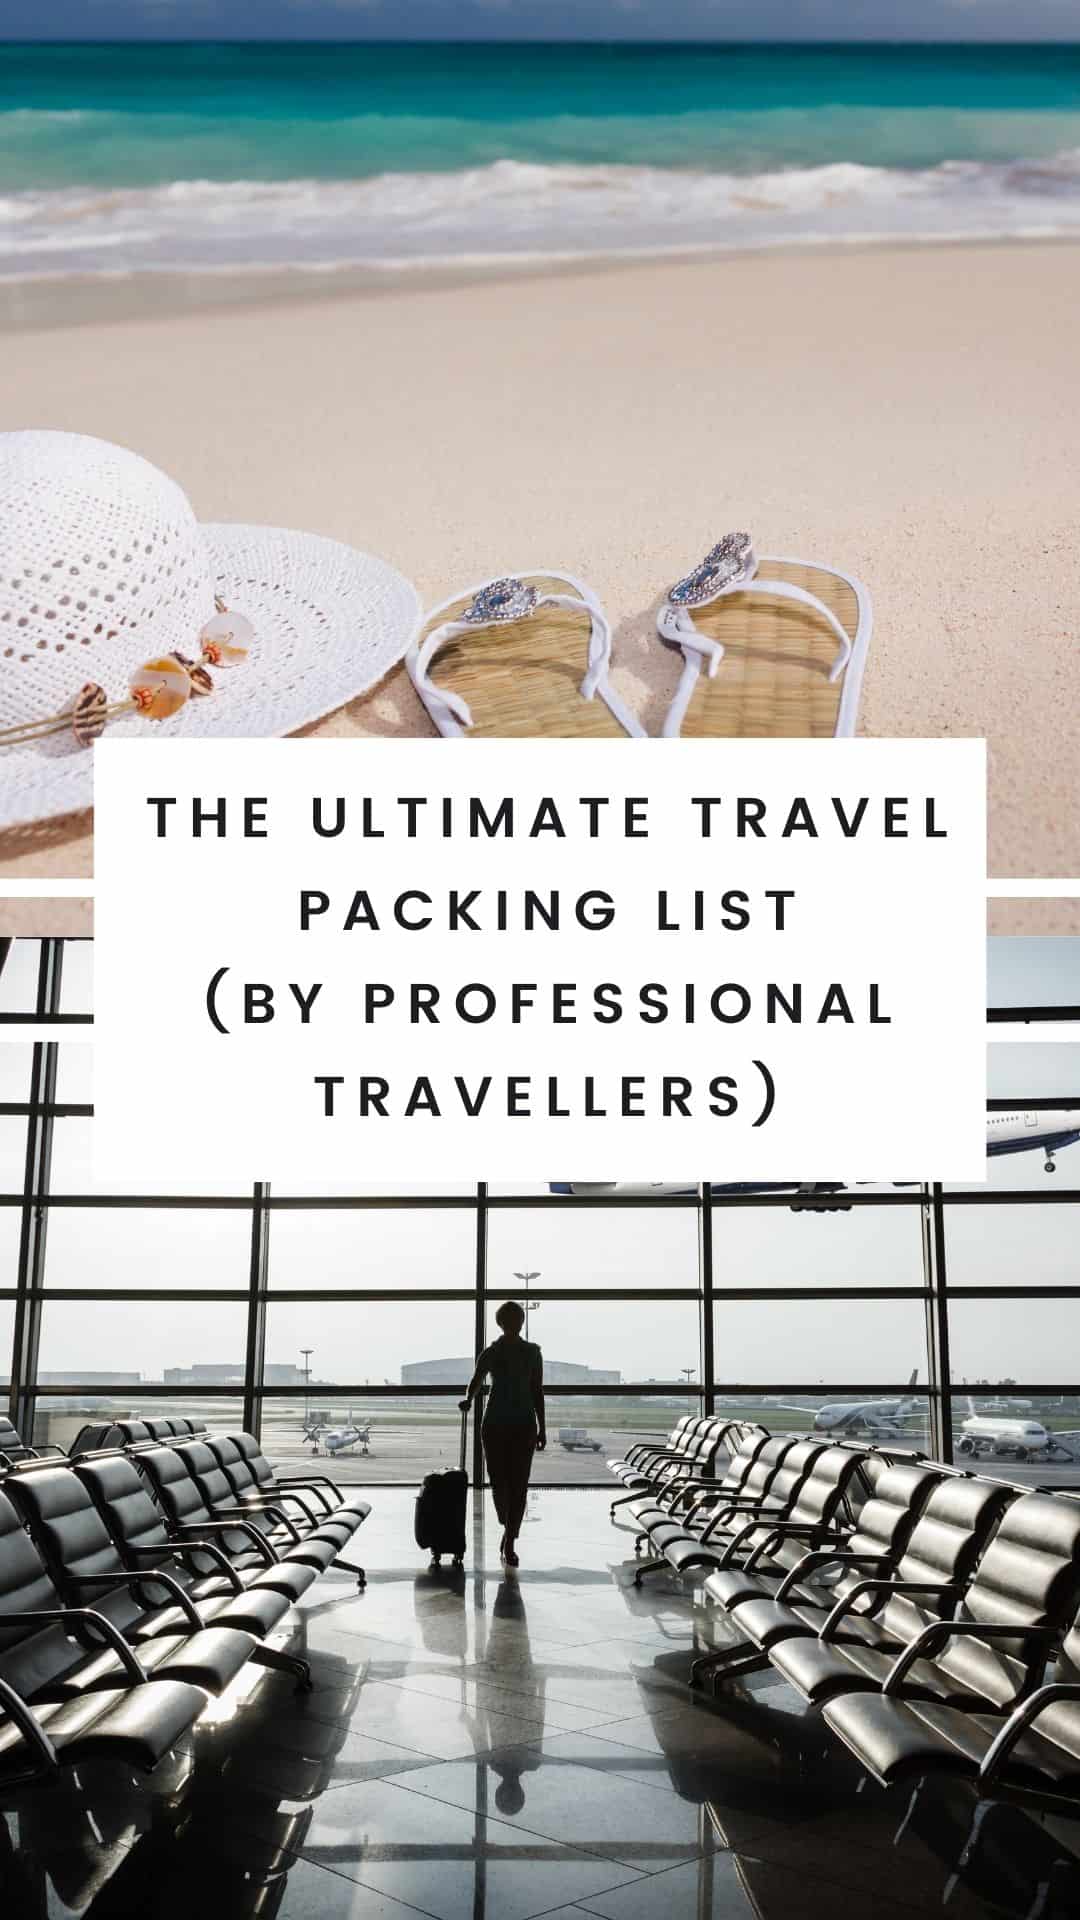 23 Top Travel Essentials: Ultimate Travel Packing List for